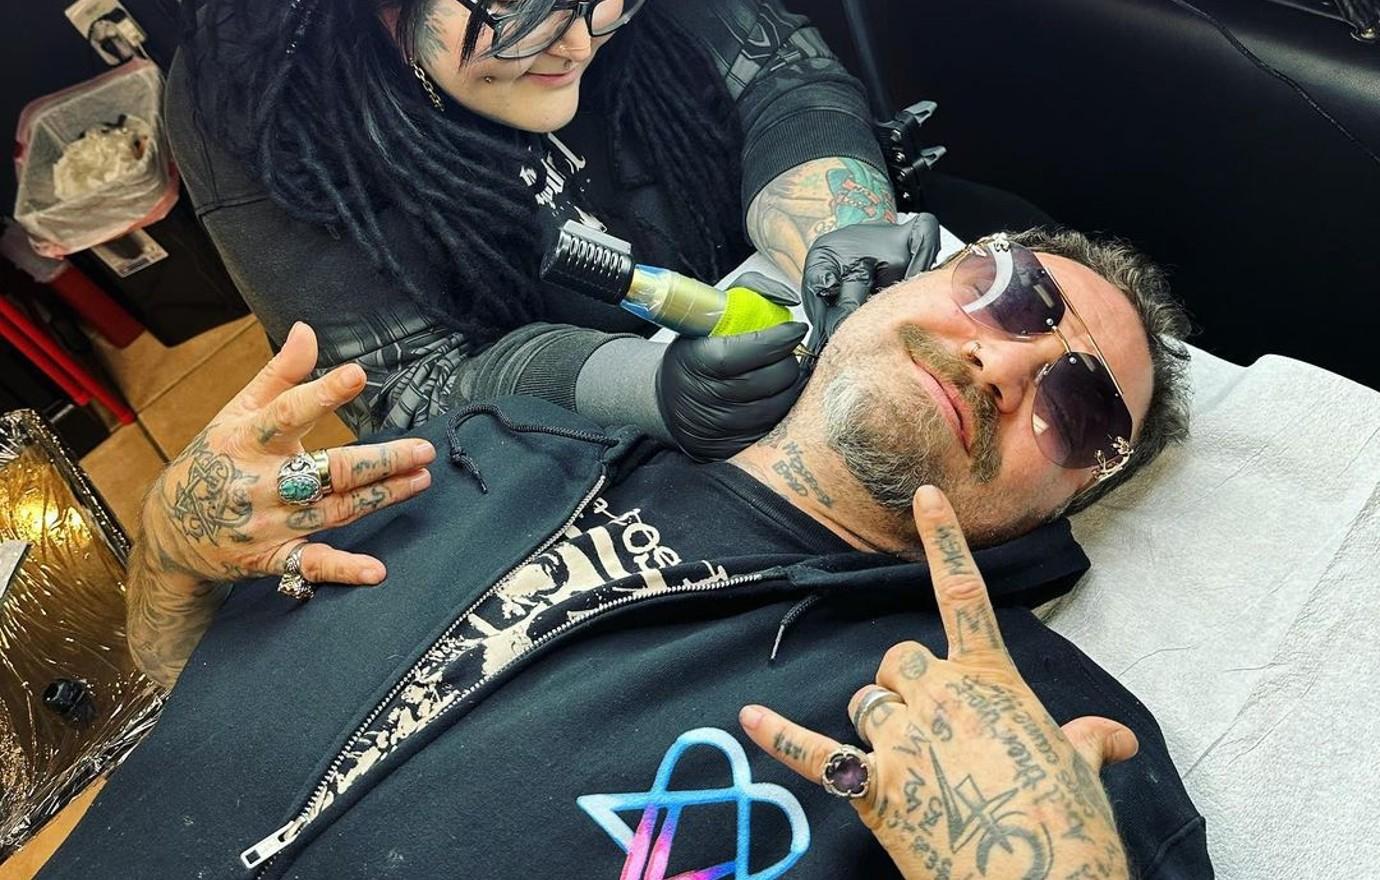 Sober Bam Margera Gets Britney Spears-Inspired Tattoo On His Neck